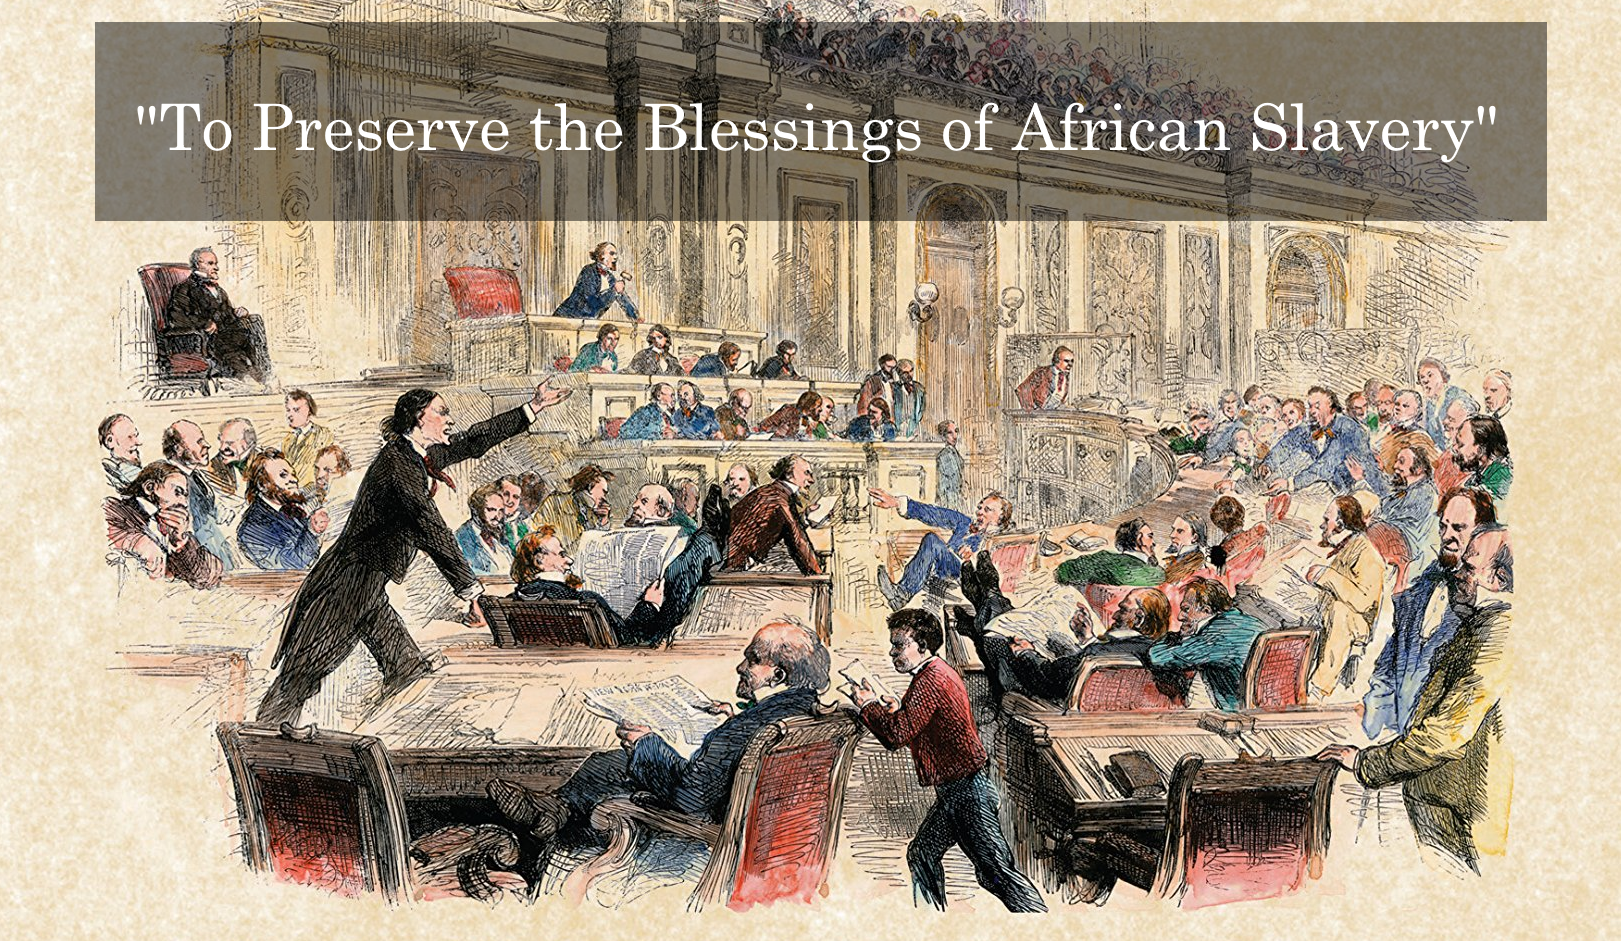 "To Preserve the Blessings of African Slavery" - Louisiana Secession Commissioner to Convention of the People of Texas